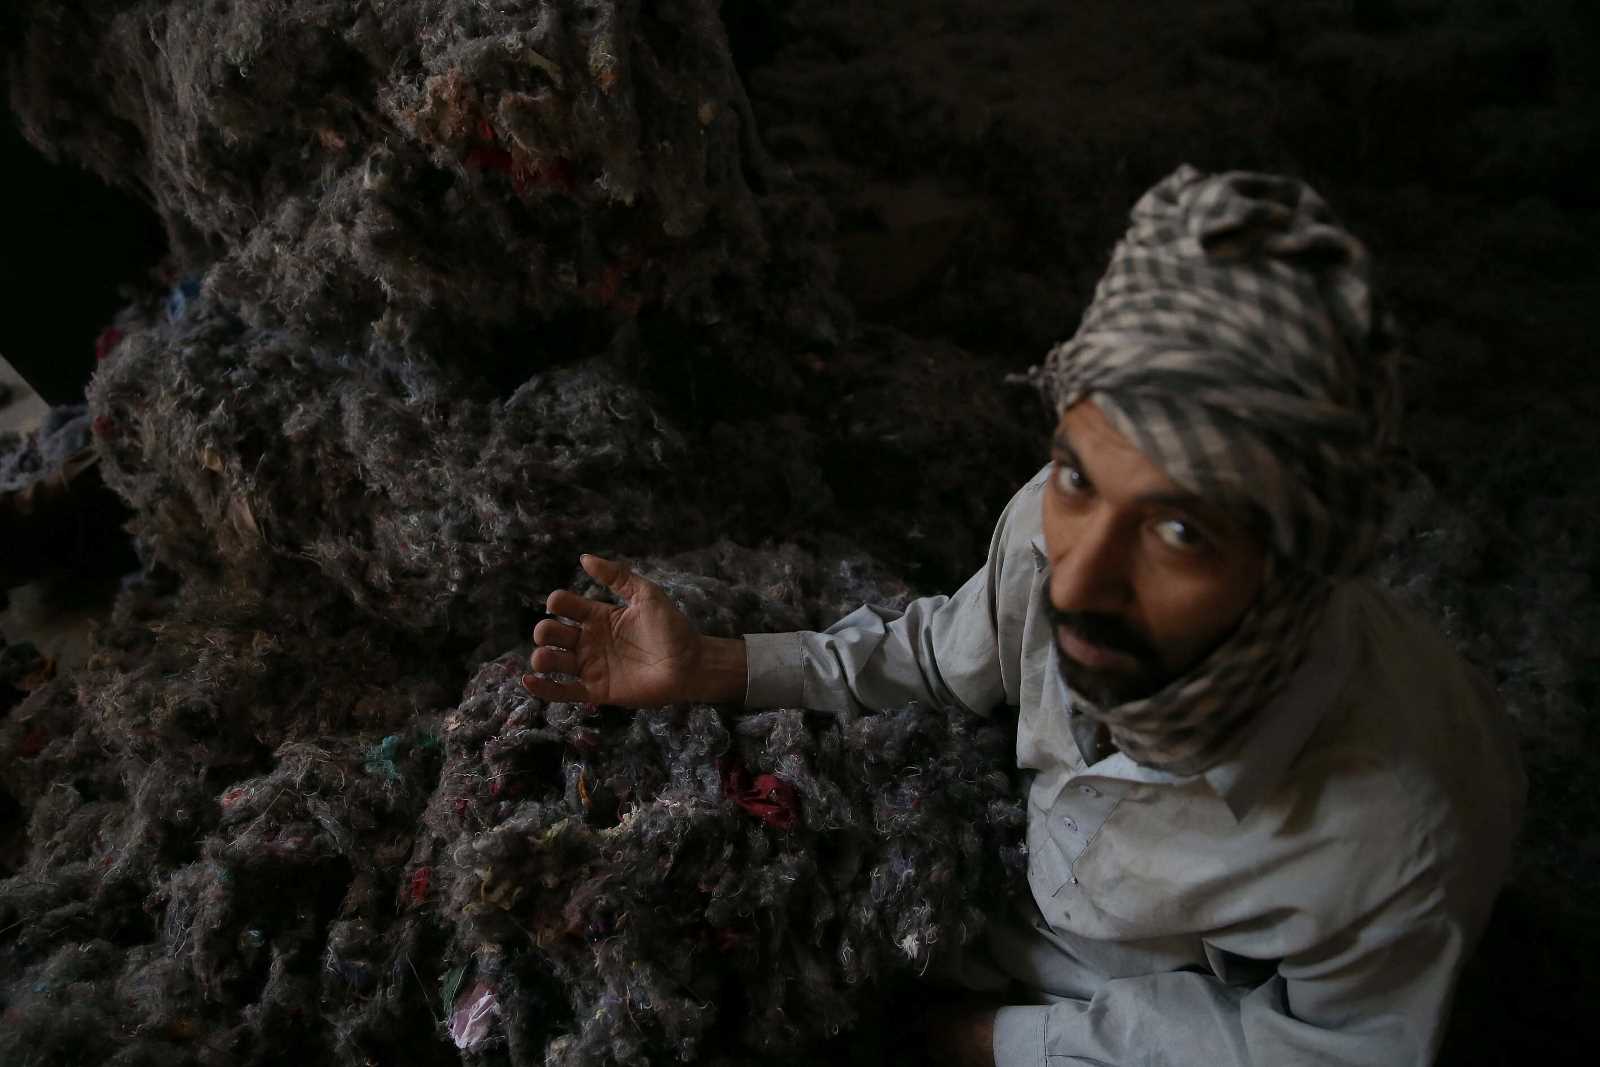 Three fingers lost in an accident: a worker of an informal wool processing business in Peshawar in 2016.